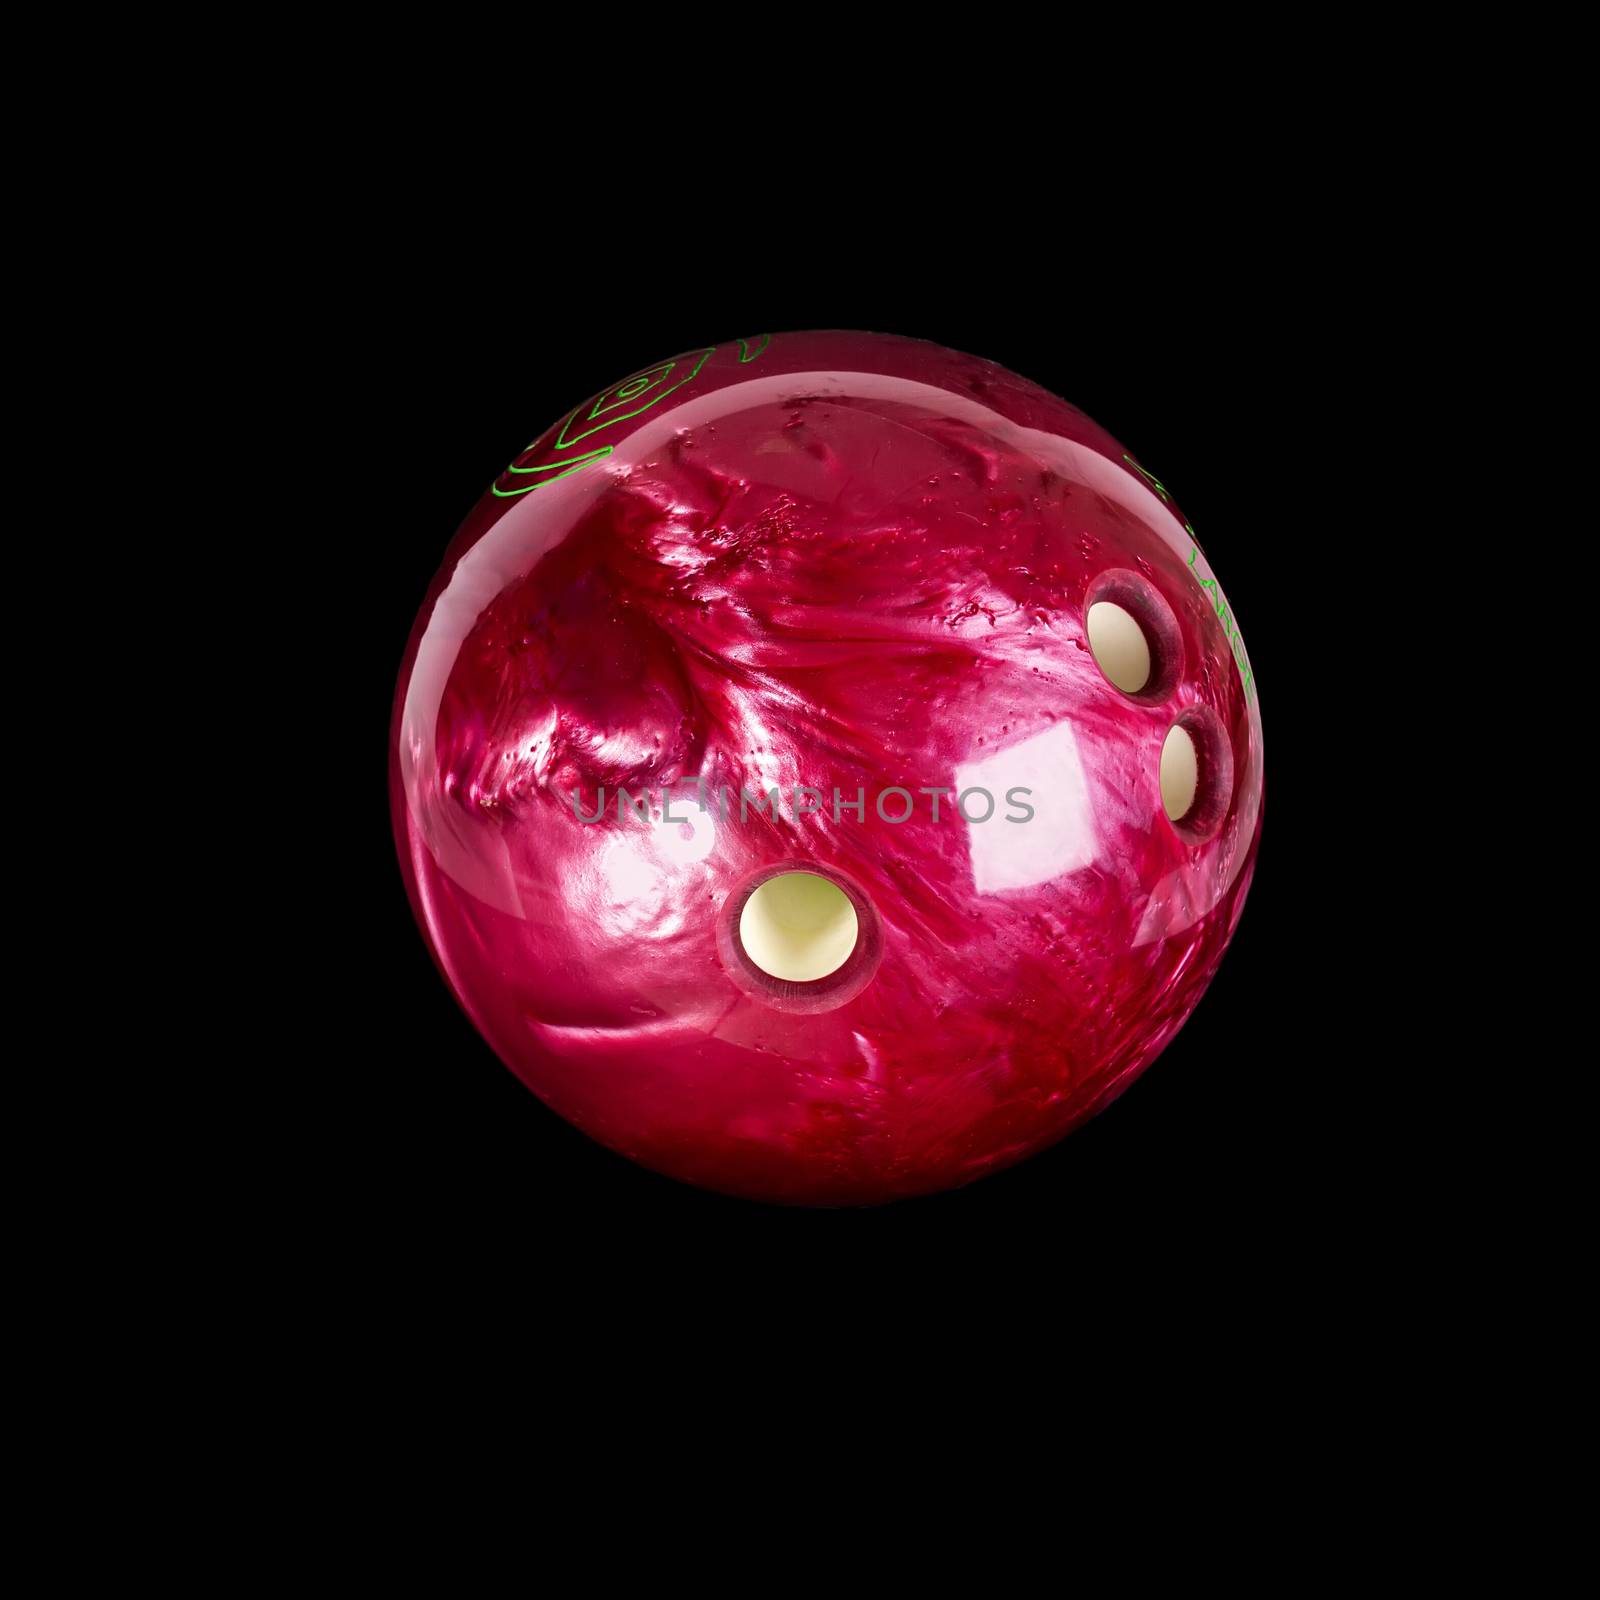 Bowling ball. Isolated on a black background close-up. by 977_ReX_977